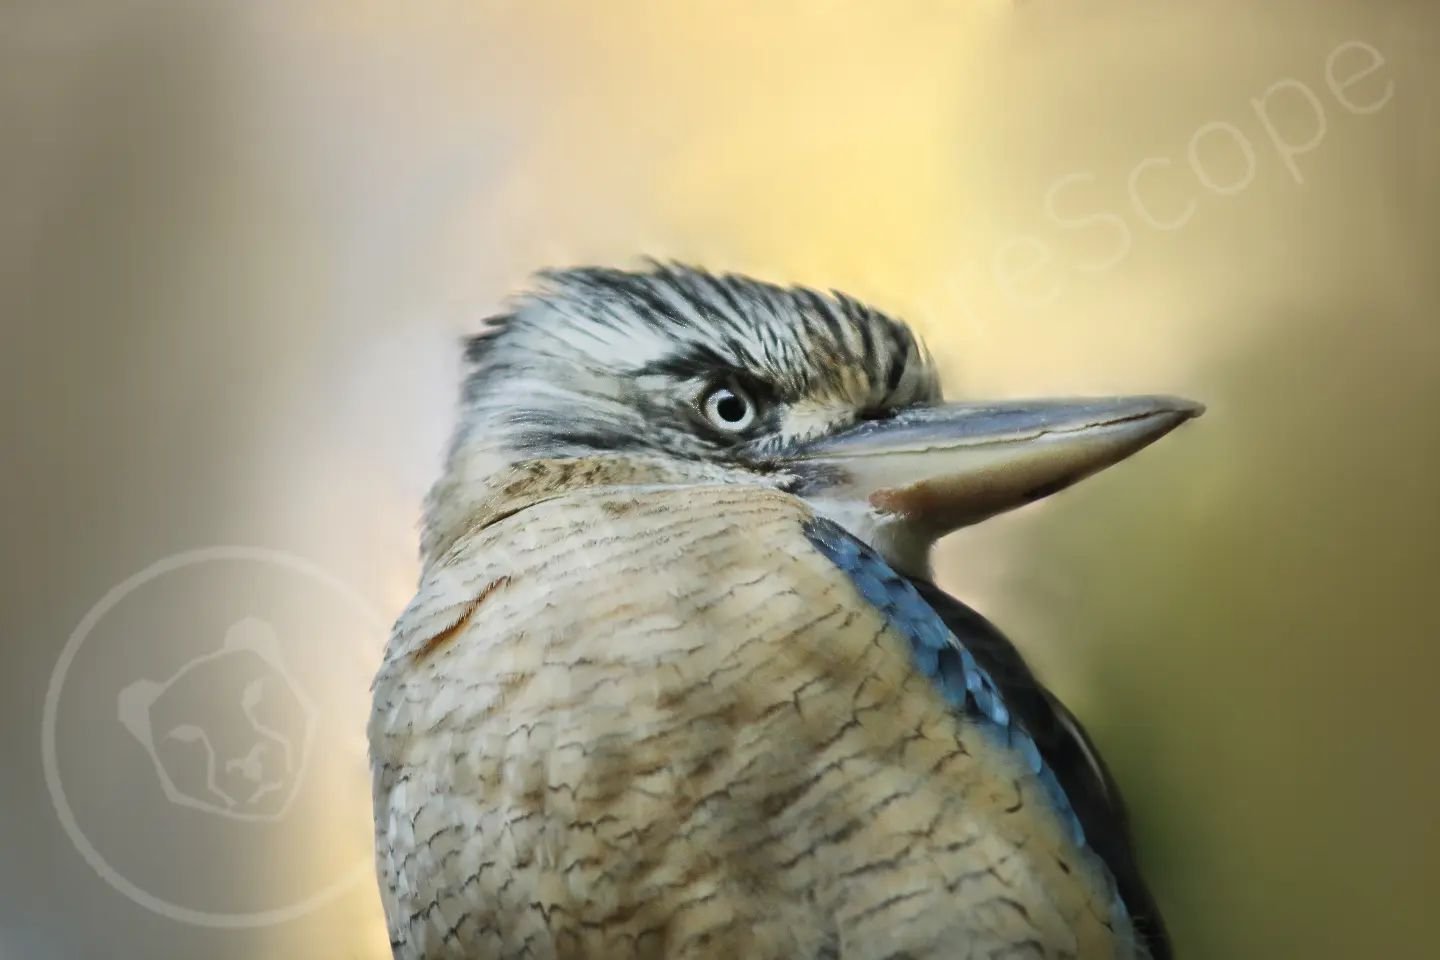 The Blue Winged Kookaburra is actually a large species of Kingfisher native to North Australia and New Guinea! They eat a range of insects, reptiles, amphibians, fish, crayfish, scorpions, spiders, snakes, small mammals and even other birds!